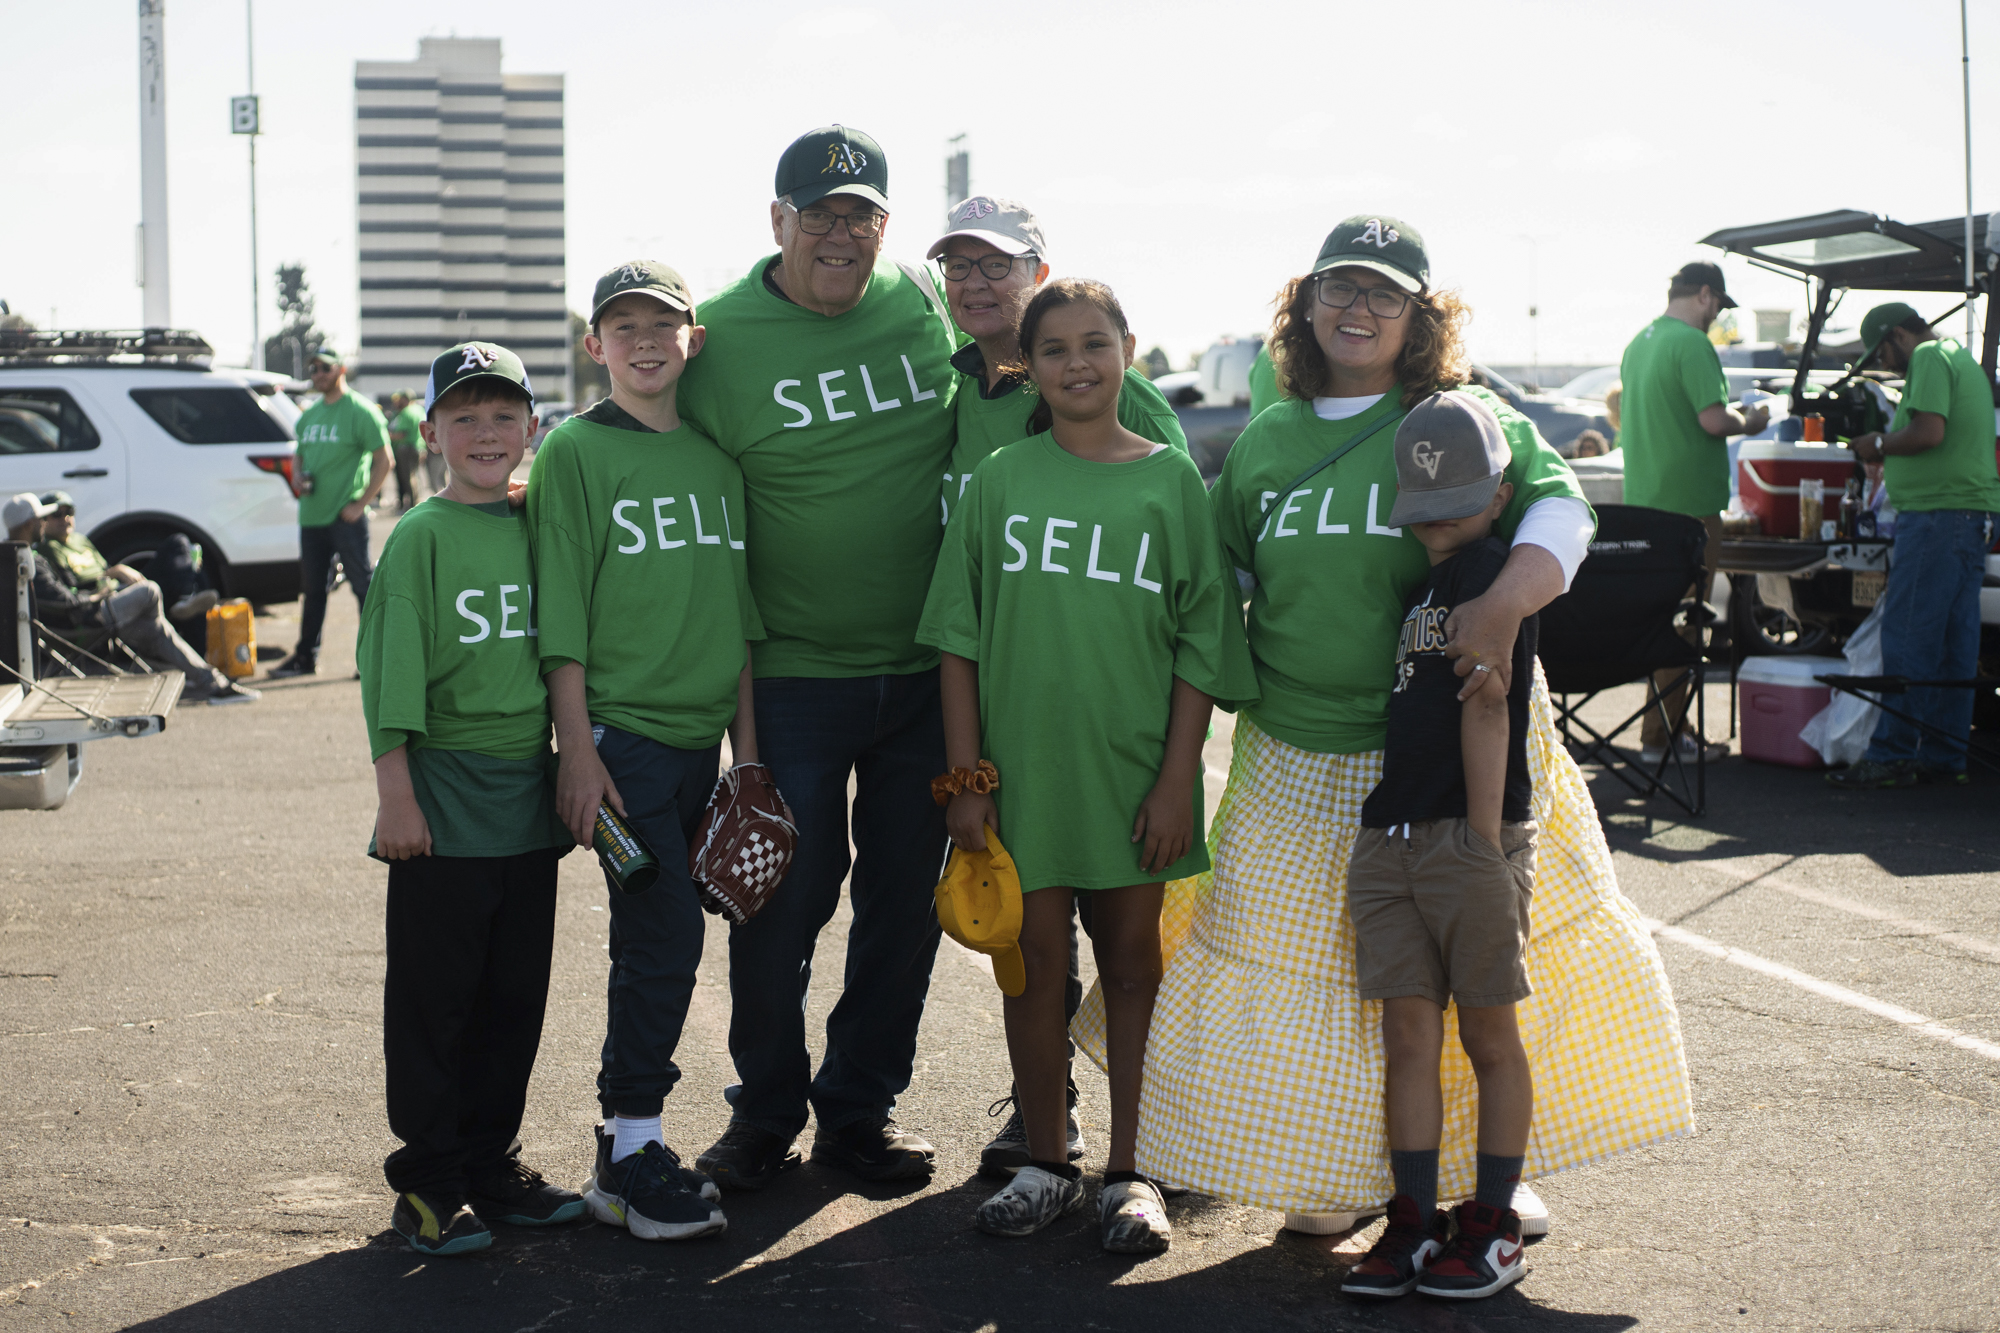 A group of seven people stand together to take a photo in an outdoor parking lot, all but one wear t-shirts reading "sell" and several wear Oakland A's hats.